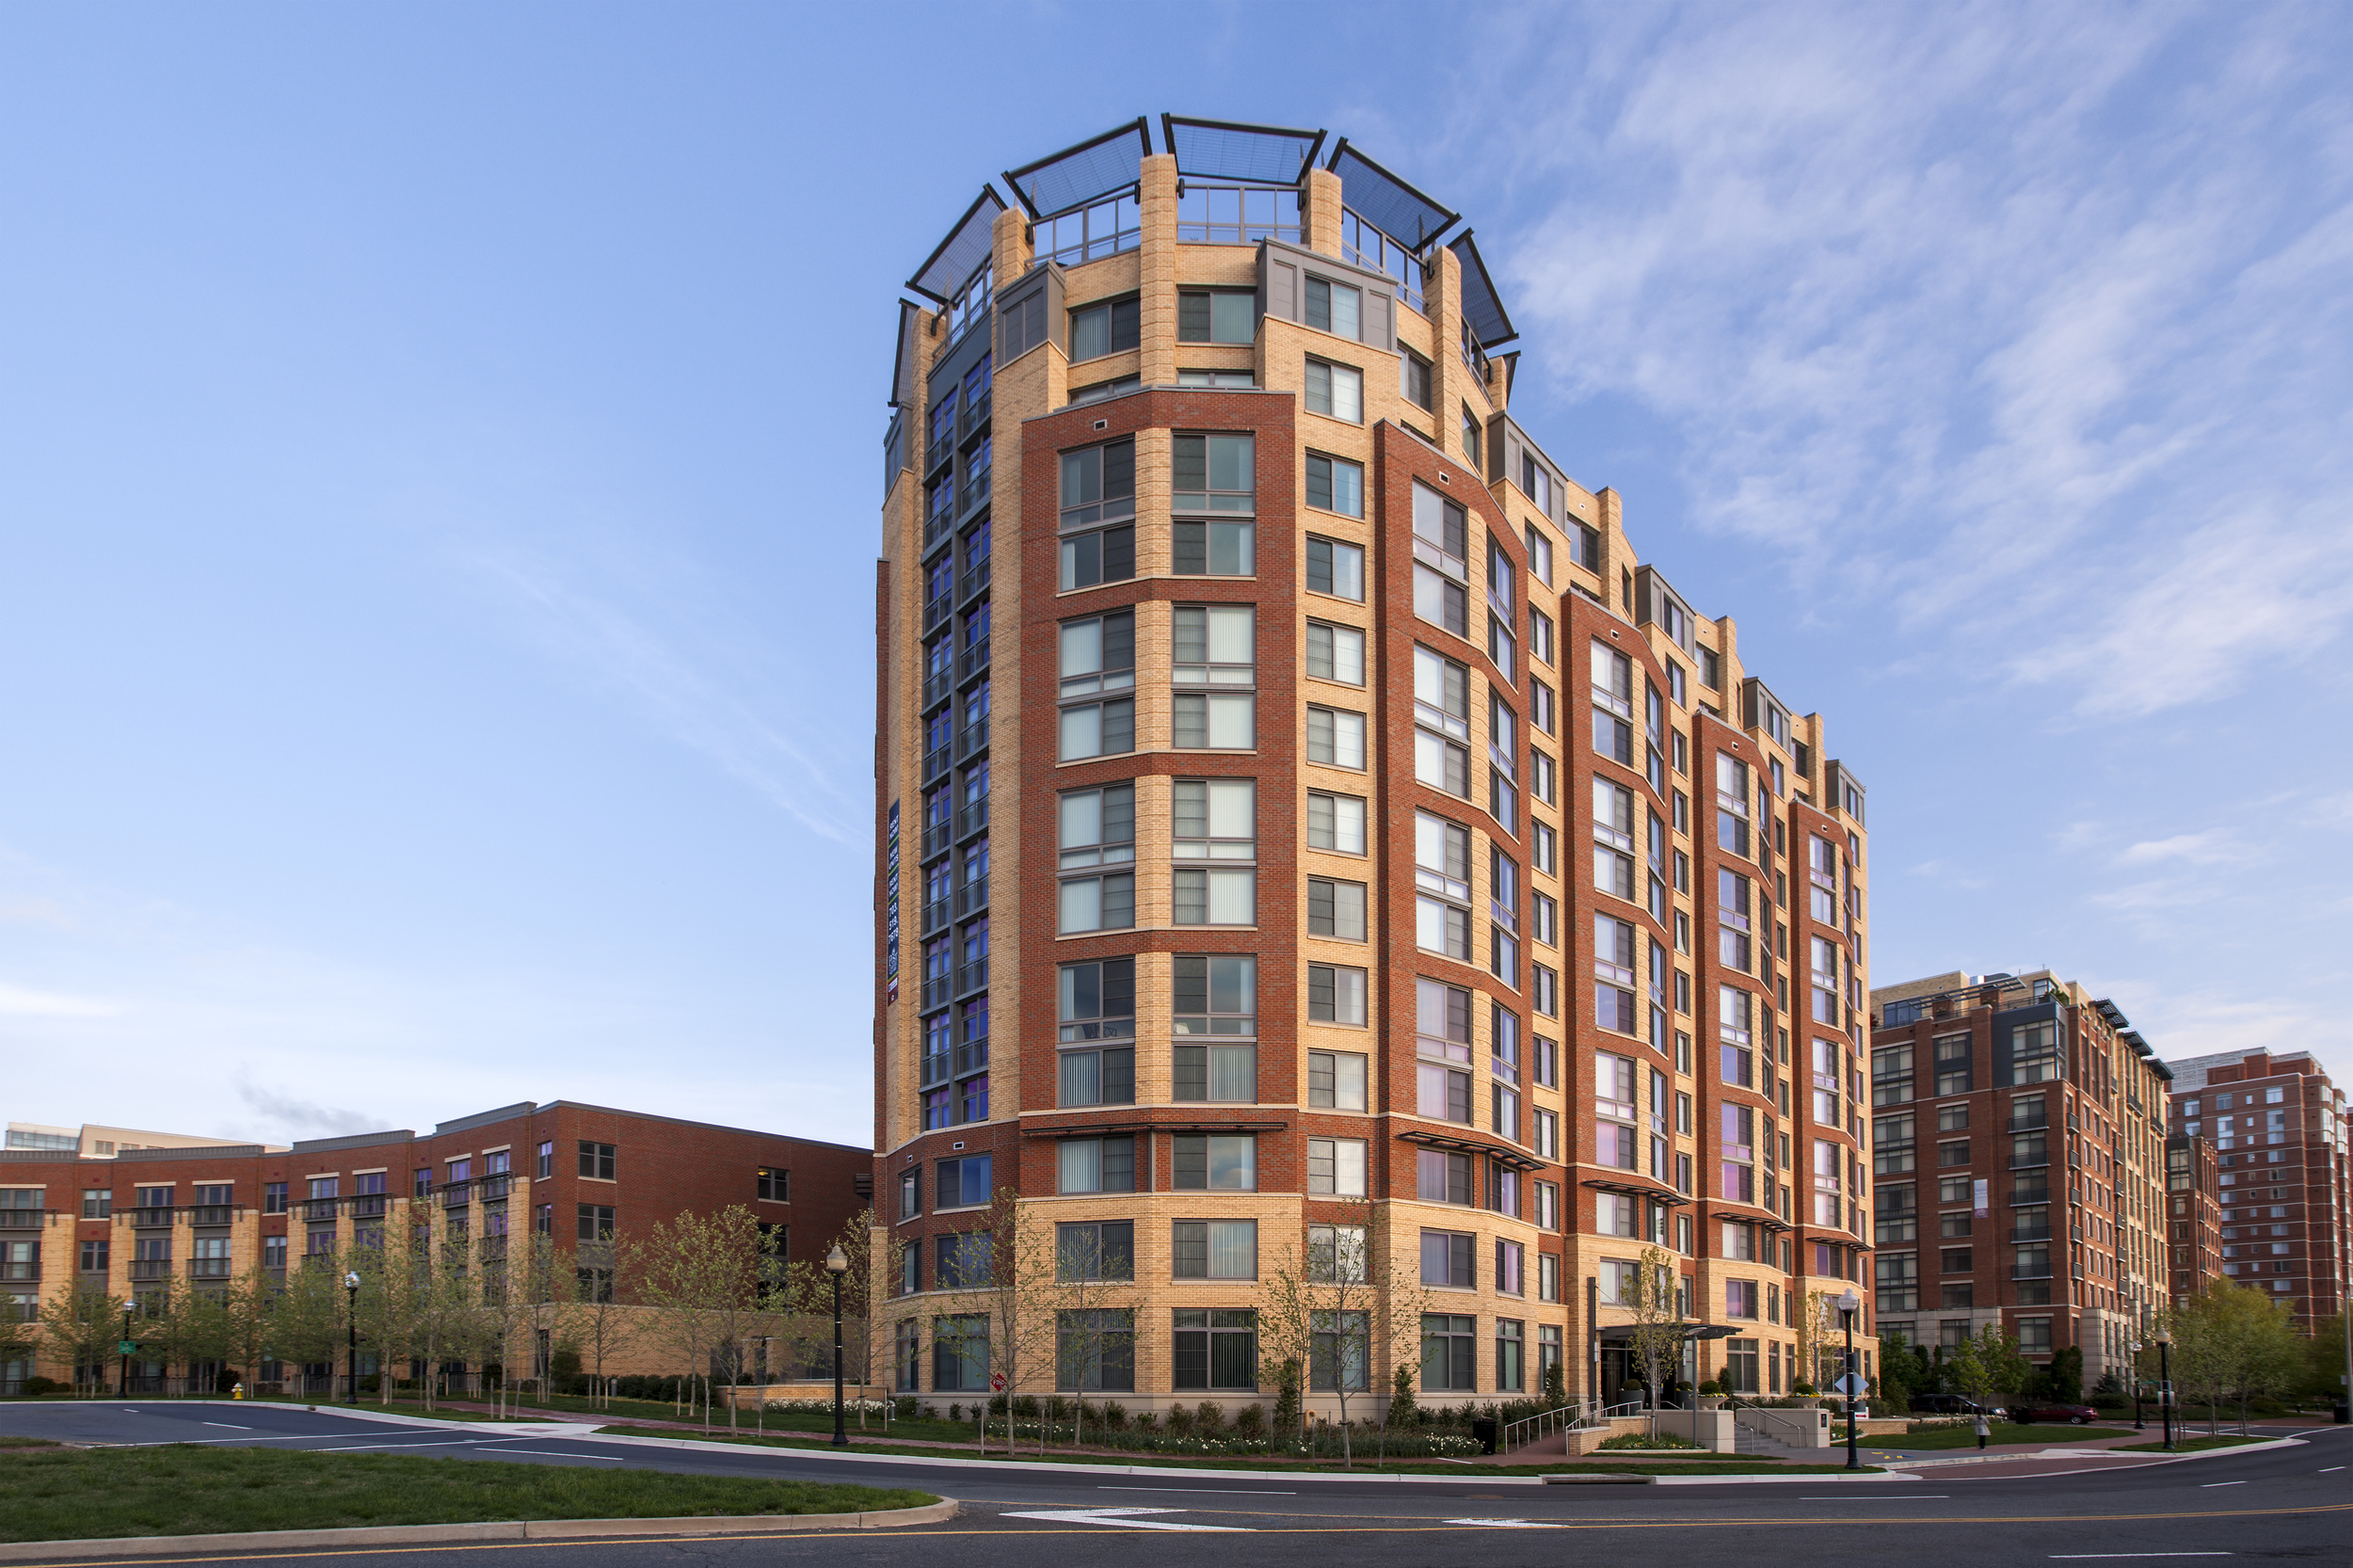 Post Carlyle Square Apts Exterior Image-141316.jpg